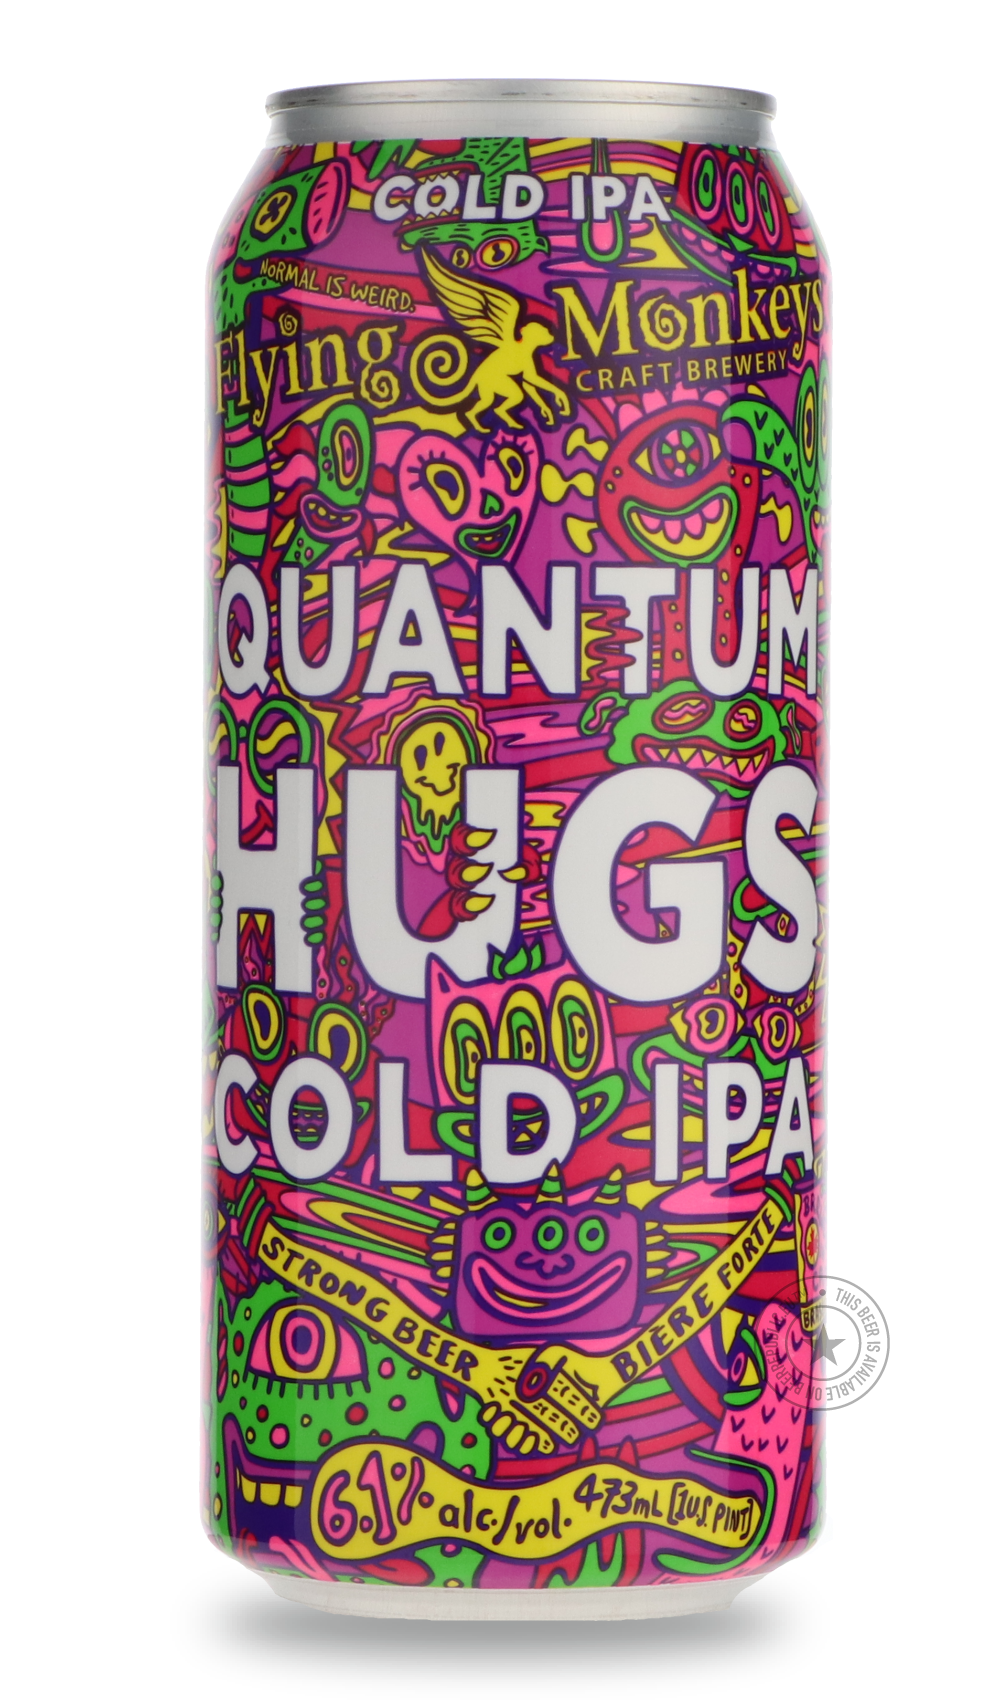 -Flying Monkeys- Quantum Hugs-IPA- Only @ Beer Republic - The best online beer store for American & Canadian craft beer - Buy beer online from the USA and Canada - Bier online kopen - Amerikaans bier kopen - Craft beer store - Craft beer kopen - Amerikanisch bier kaufen - Bier online kaufen - Acheter biere online - IPA - Stout - Porter - New England IPA - Hazy IPA - Imperial Stout - Barrel Aged - Barrel Aged Imperial Stout - Brown - Dark beer - Blond - Blonde - Pilsner - Lager - Wheat - Weizen - Amber - Bar